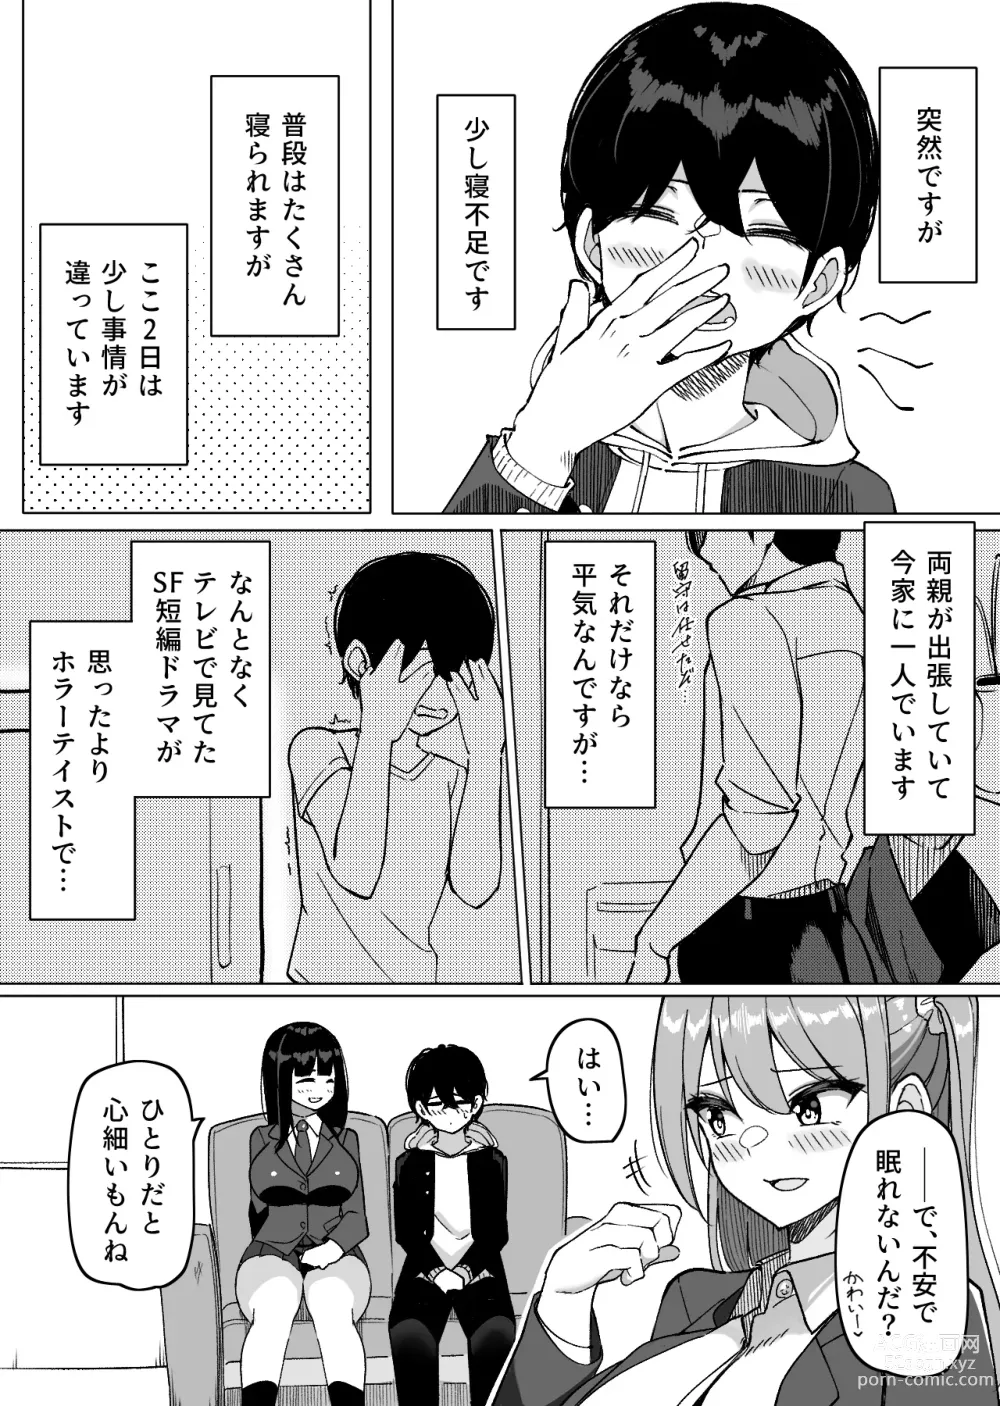 Page 2 of doujinshi Daily Sleepover With Big-breasted Girls